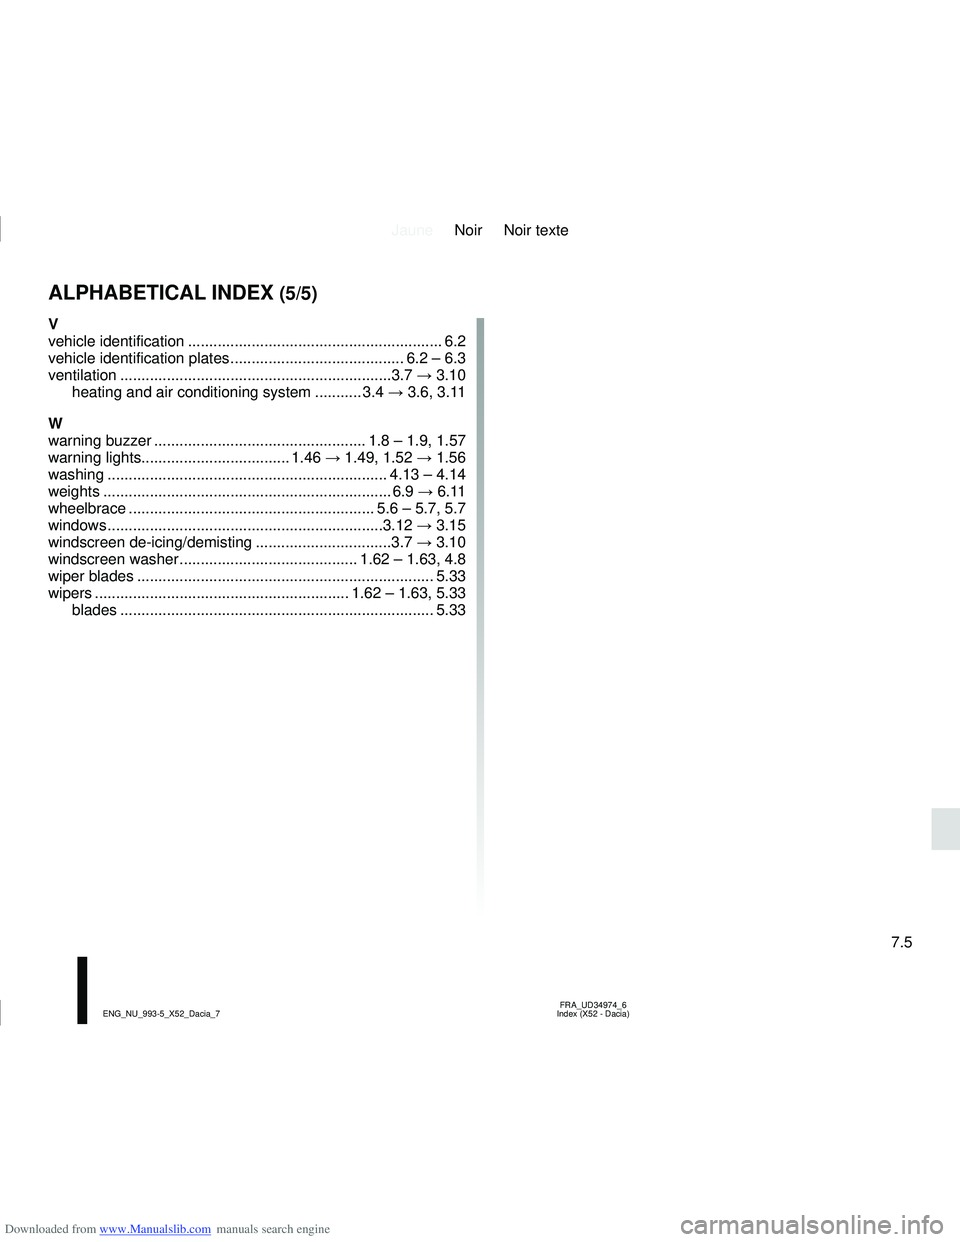 DACIA SANDERO 2022  Owners Manual Downloaded from www.Manualslib.com manuals search engine JauneNoir Noir texte
7.5
FRA_UD34974_6
Index (X52 - Dacia)
ENG_NU_993-5_X52_Dacia_7
ALPHABETICAL INDEX (5/5)
V
vehicle  identification ........